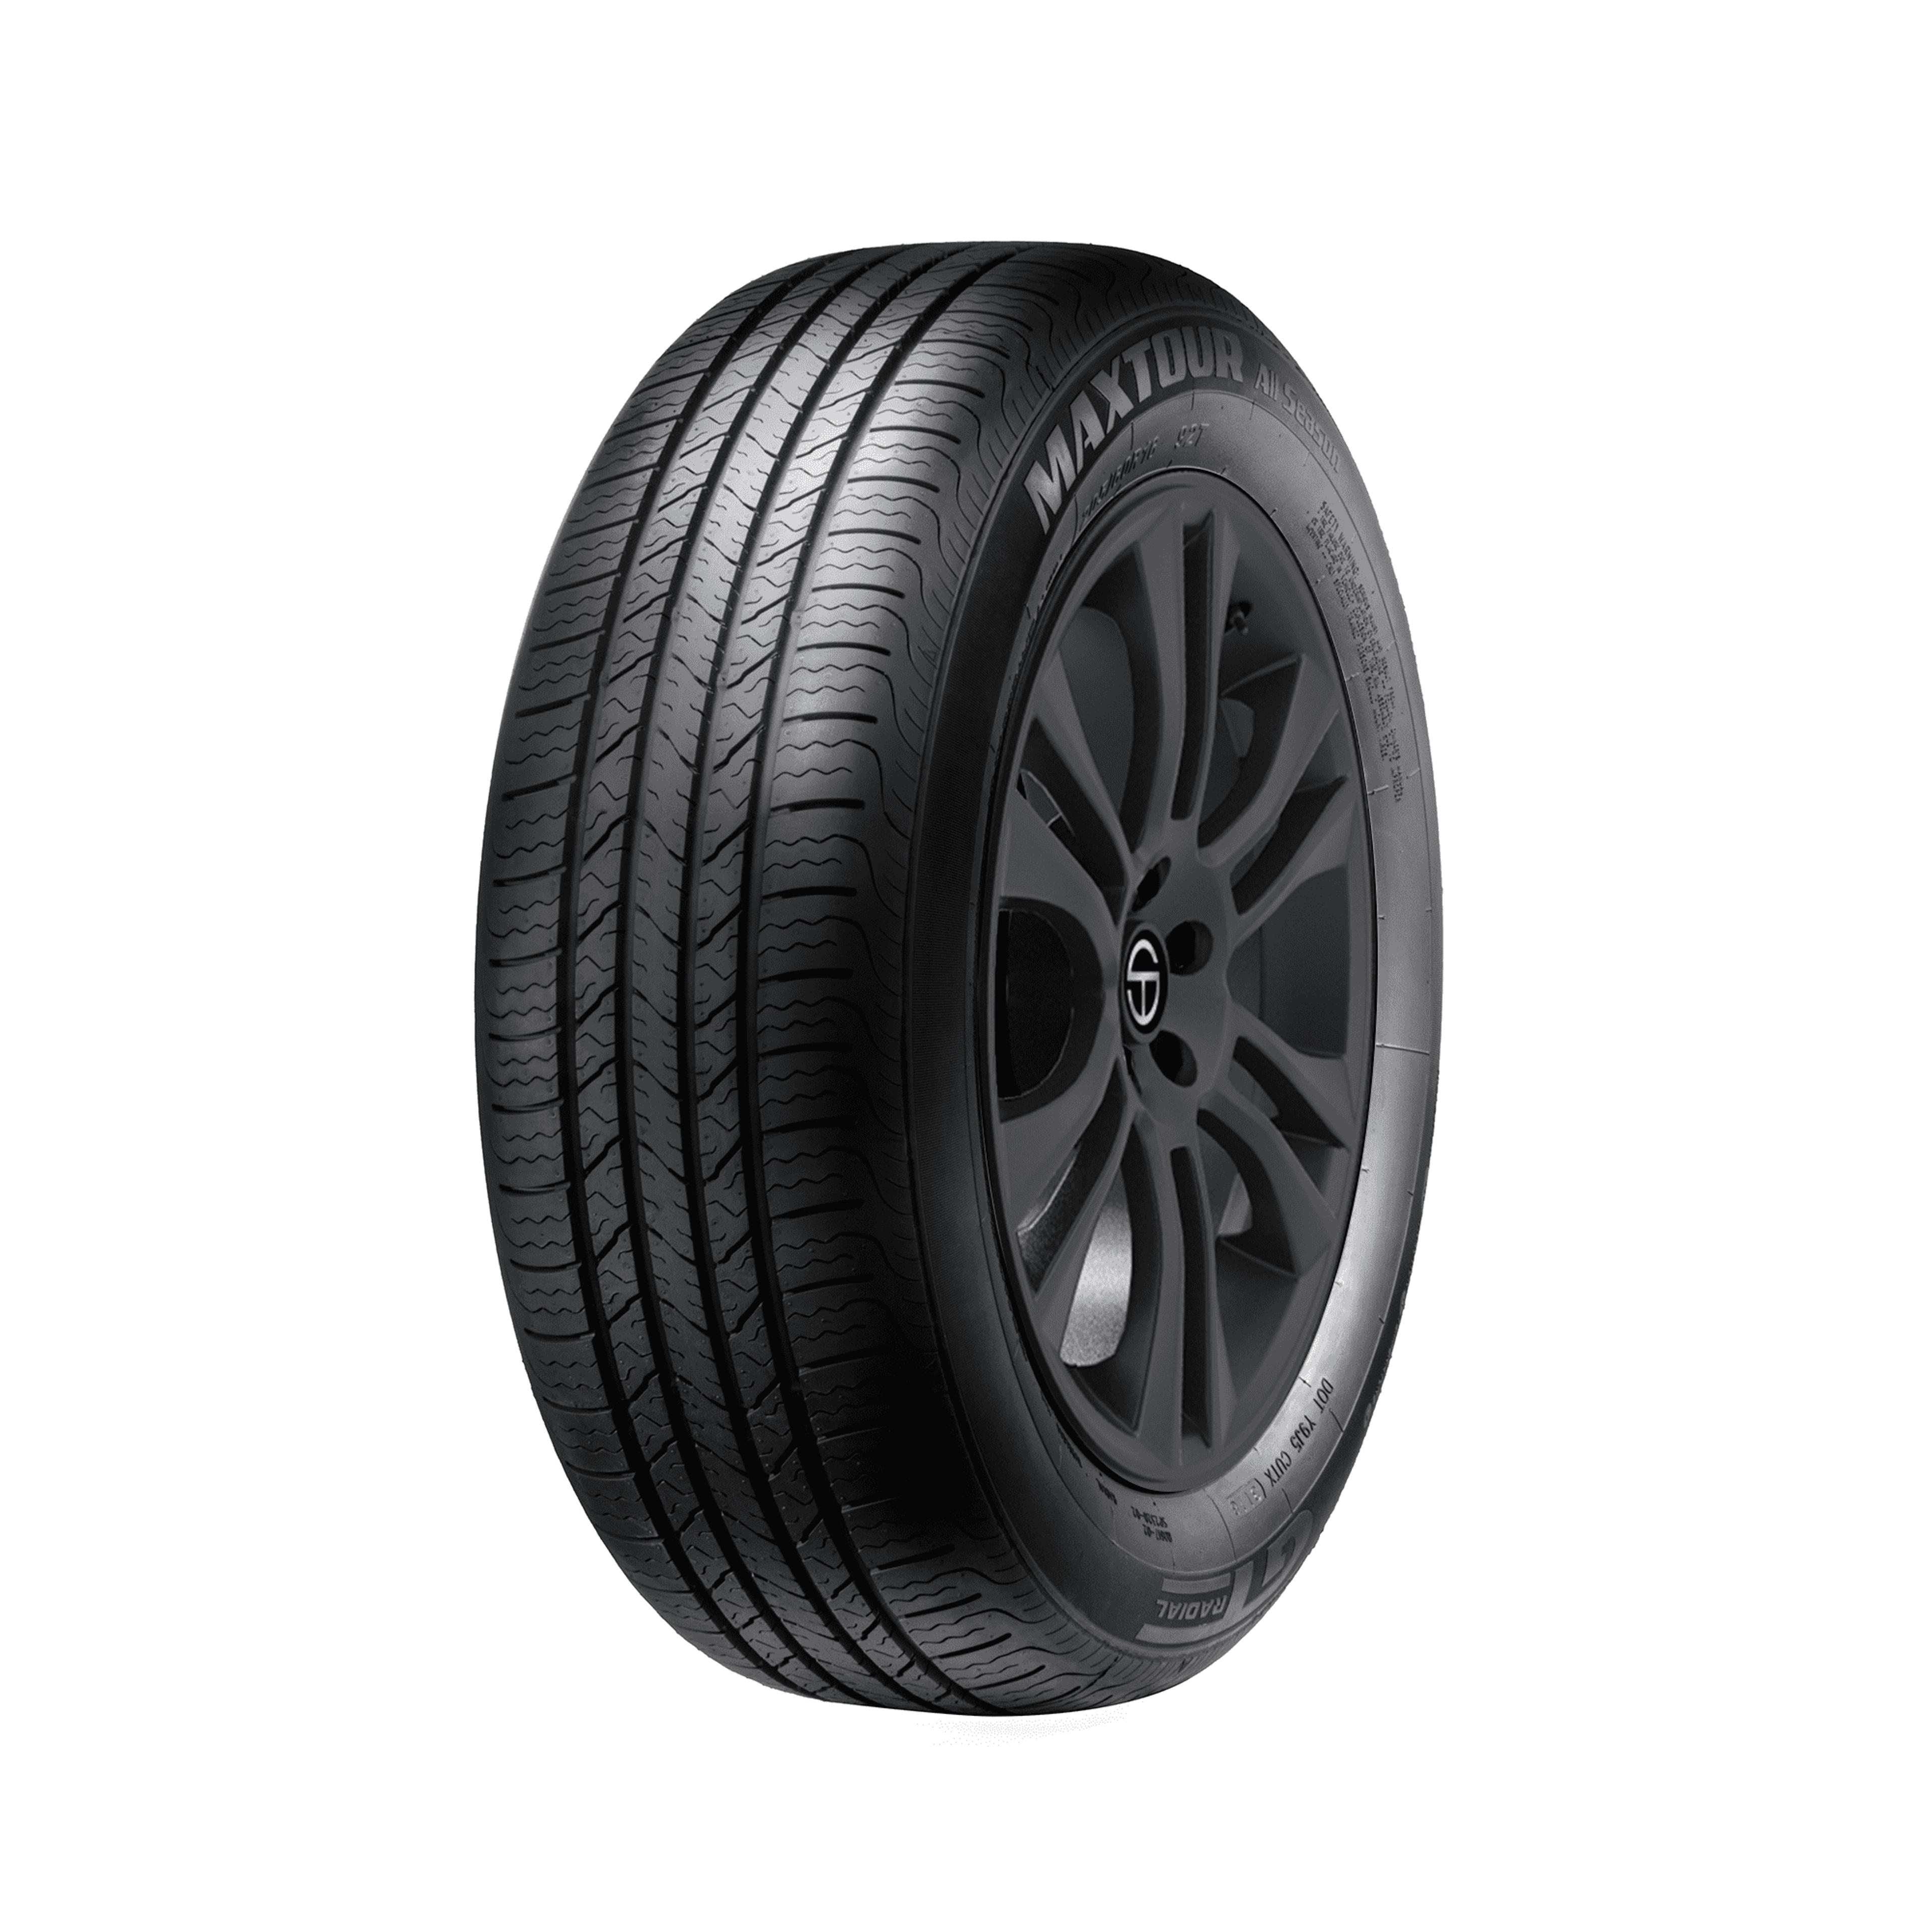 Tires Radial Online GT | Season Maxtour SimpleTire Buy All